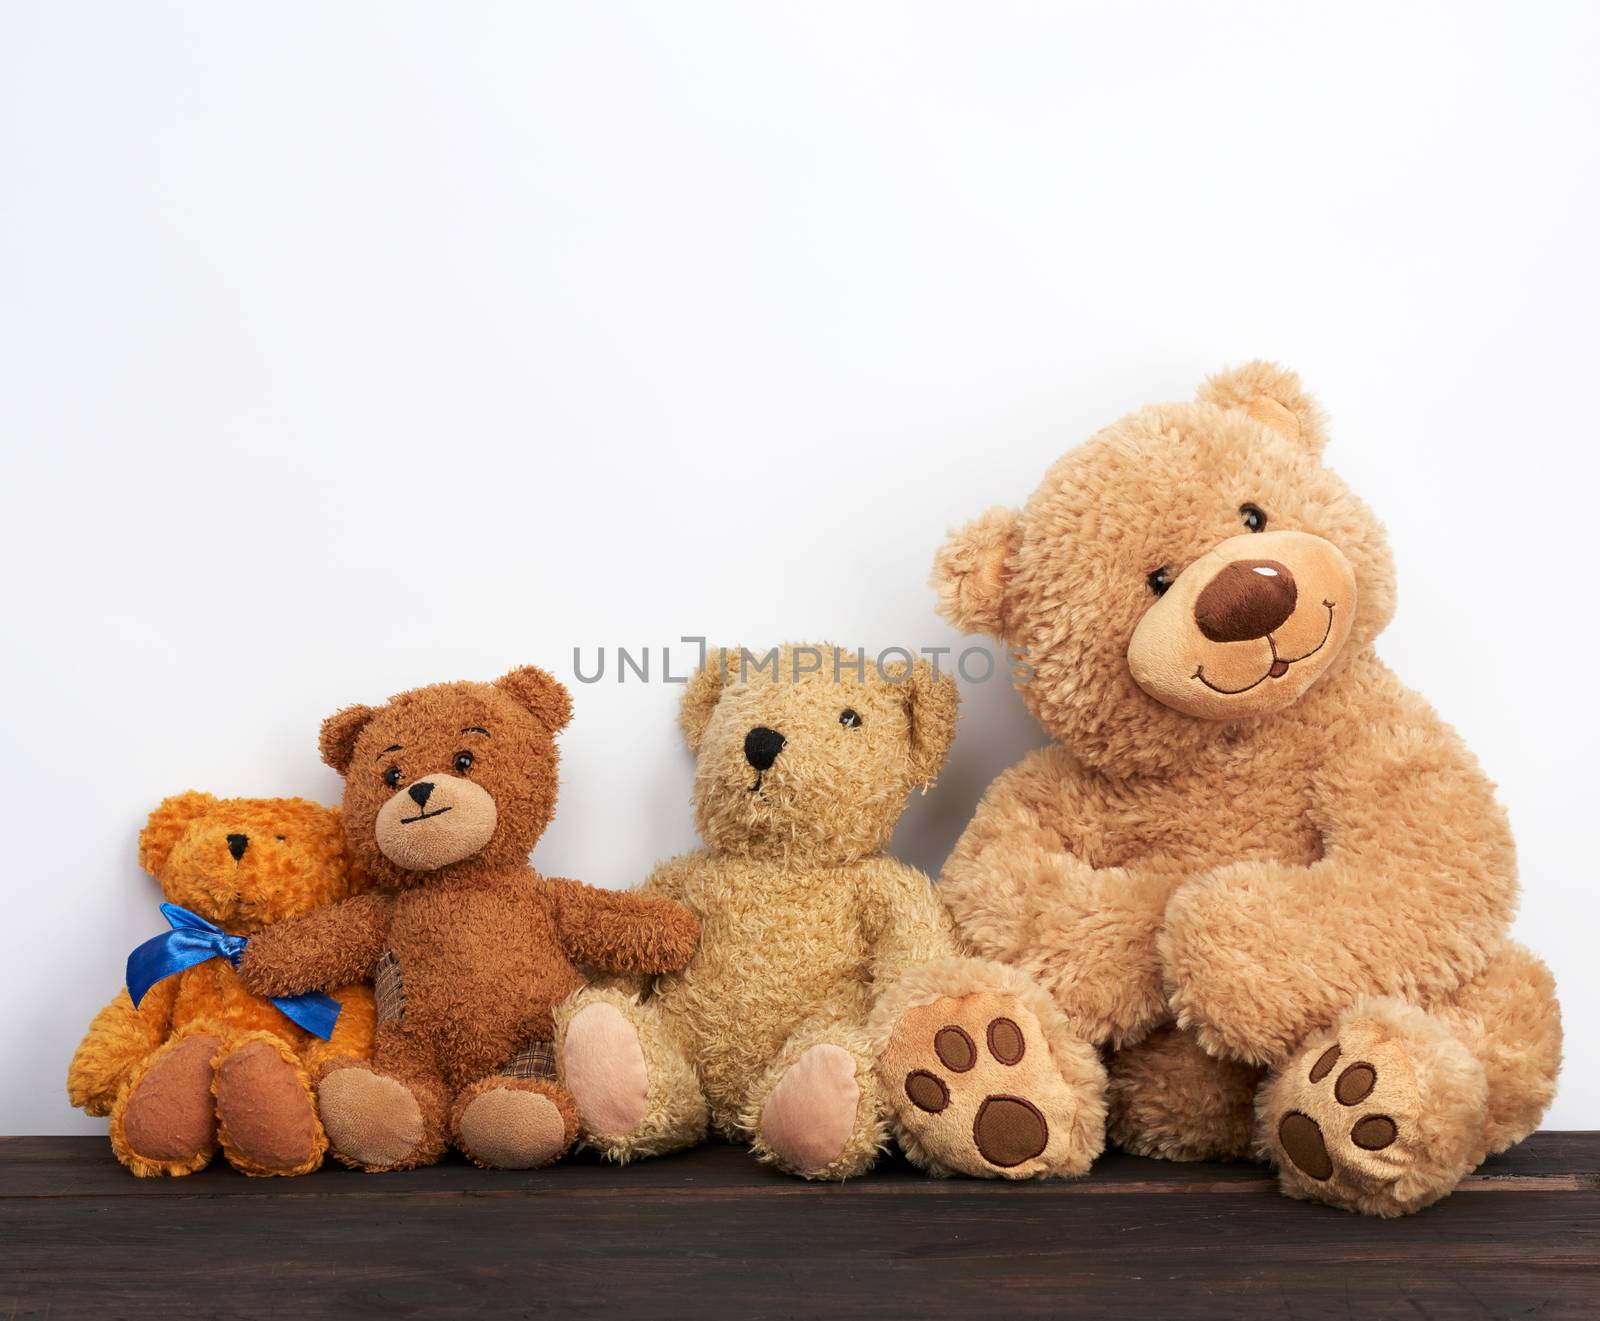 various brown teddy bears are sitting on a brown wooden table, white background, friendship concept